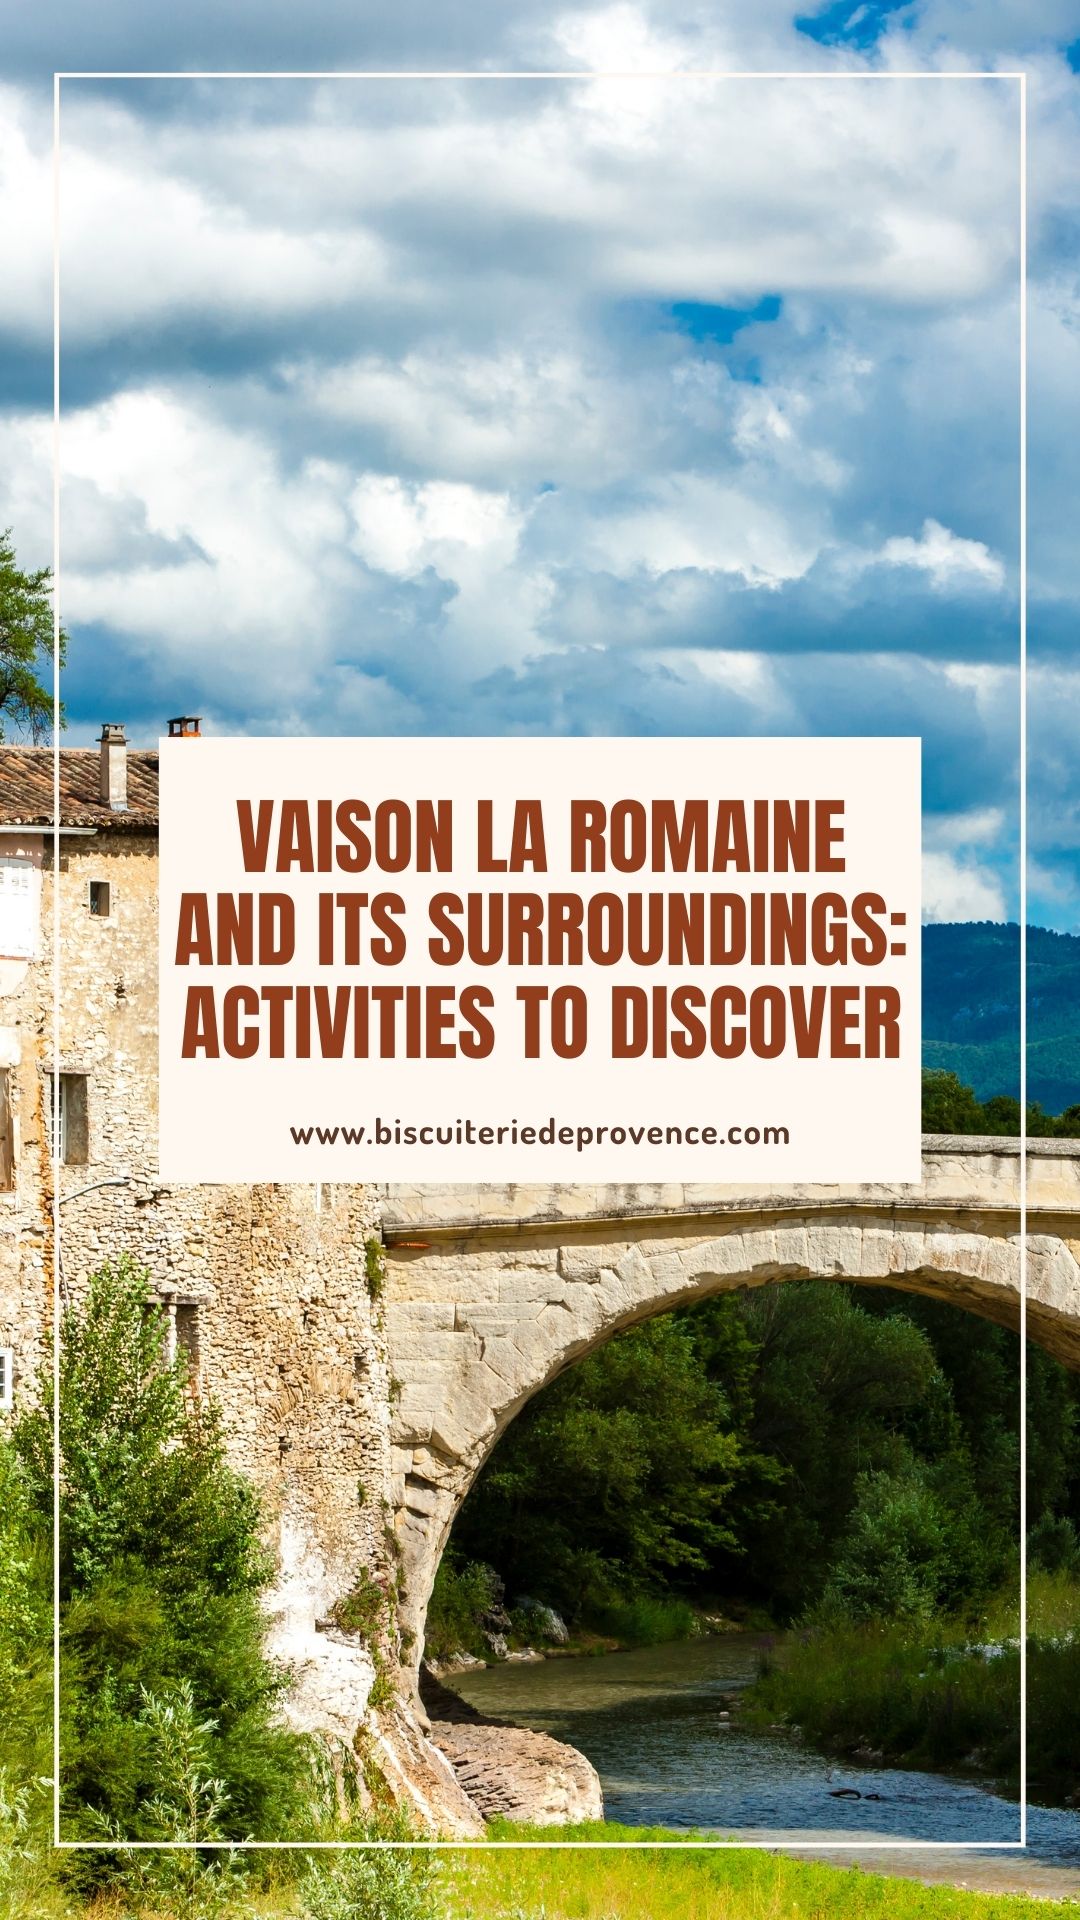 Vaison and its surroundings: activities to discover